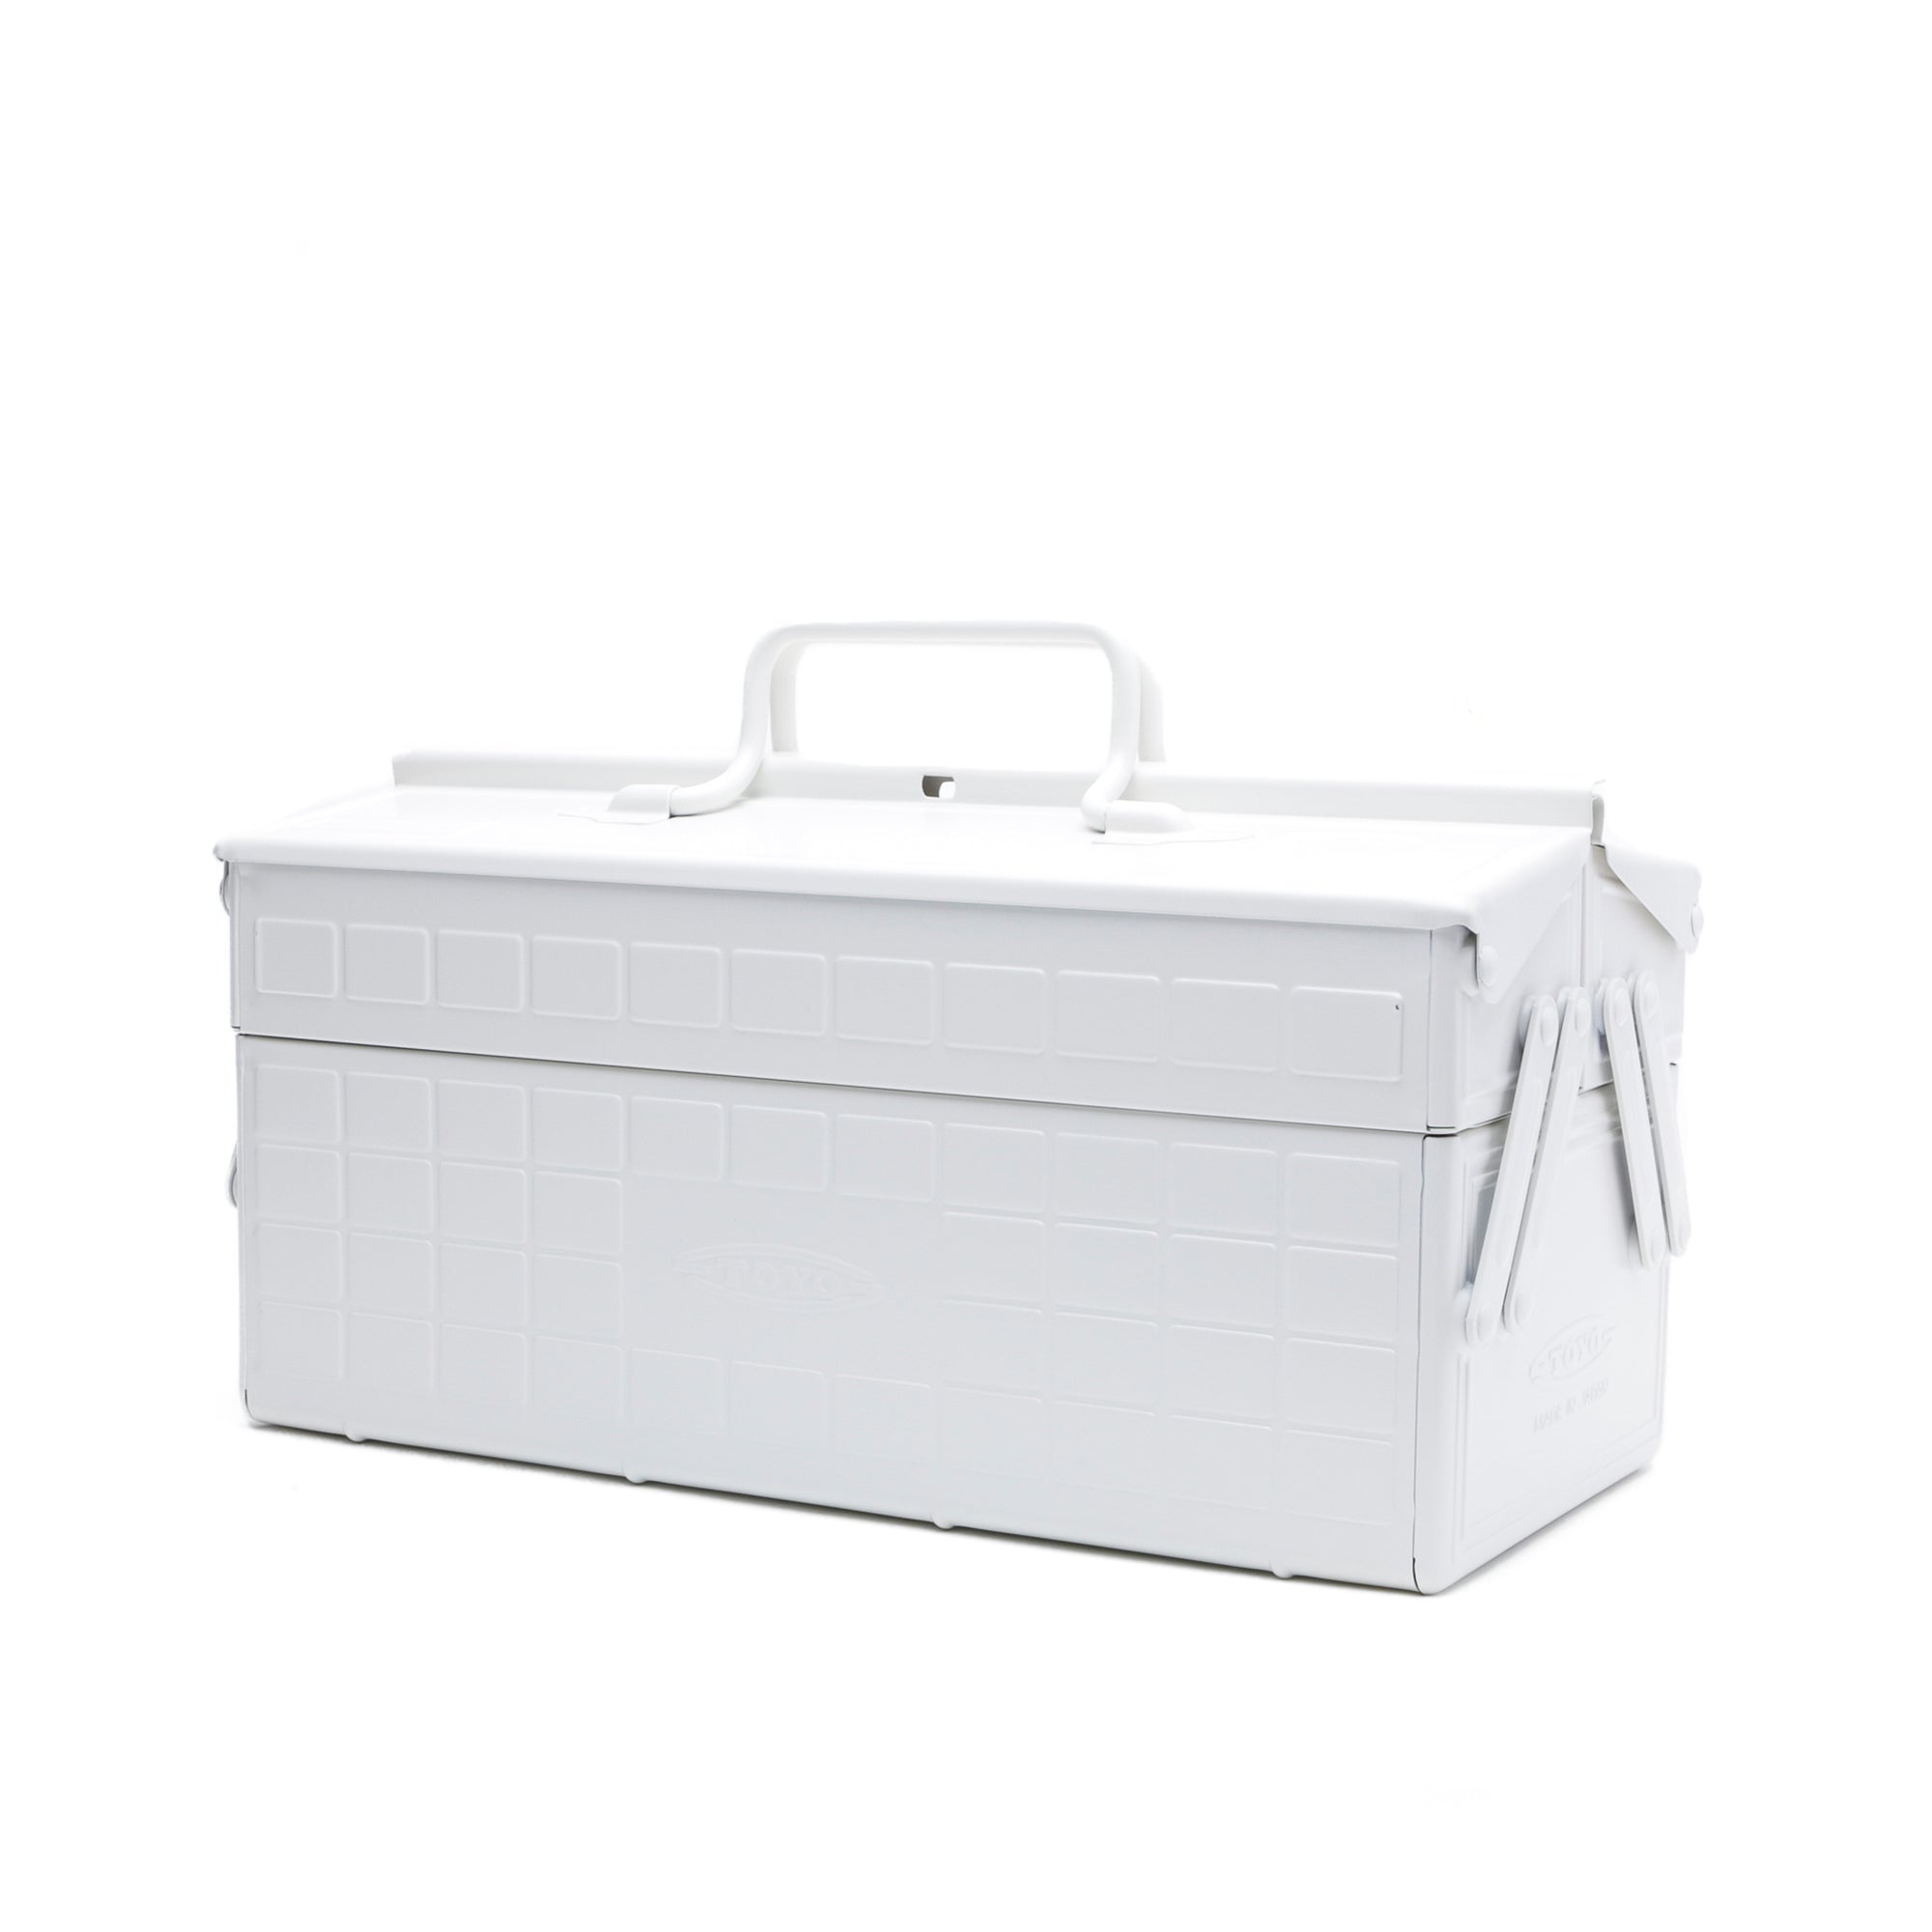 White Toyo Steel Toolbox | Cantilever Lid | Upper Storage Trays, Style ST-350